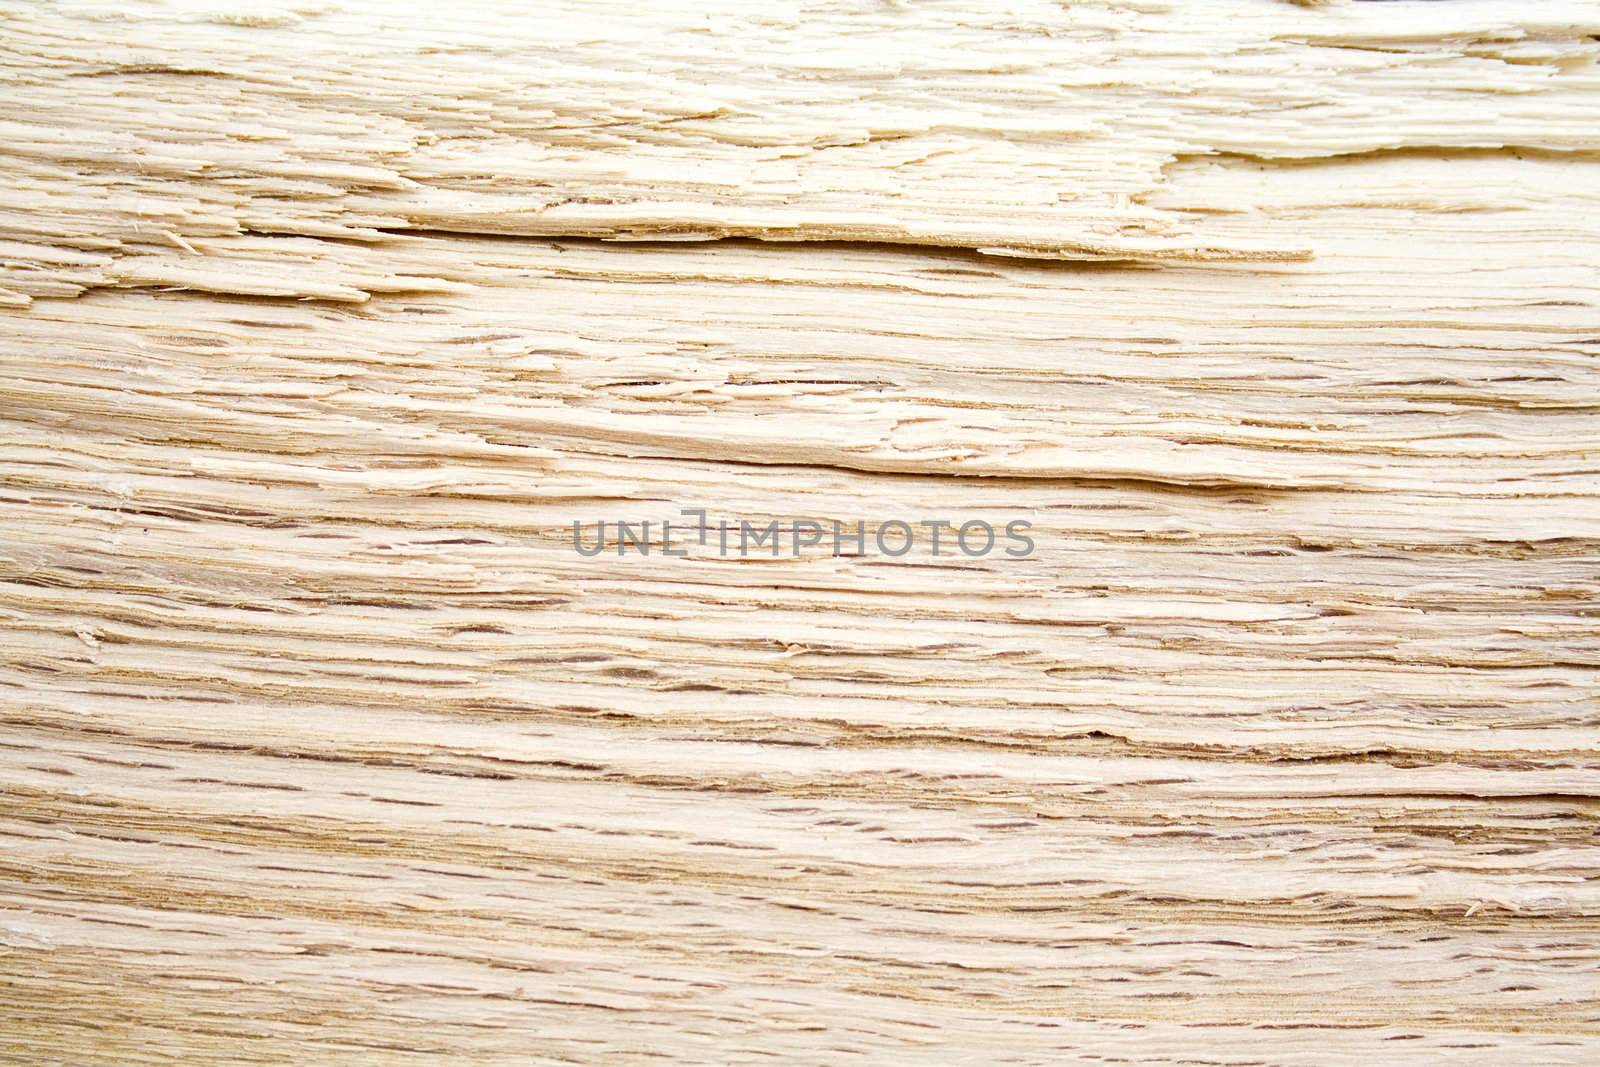 Abstract background from sliced oak